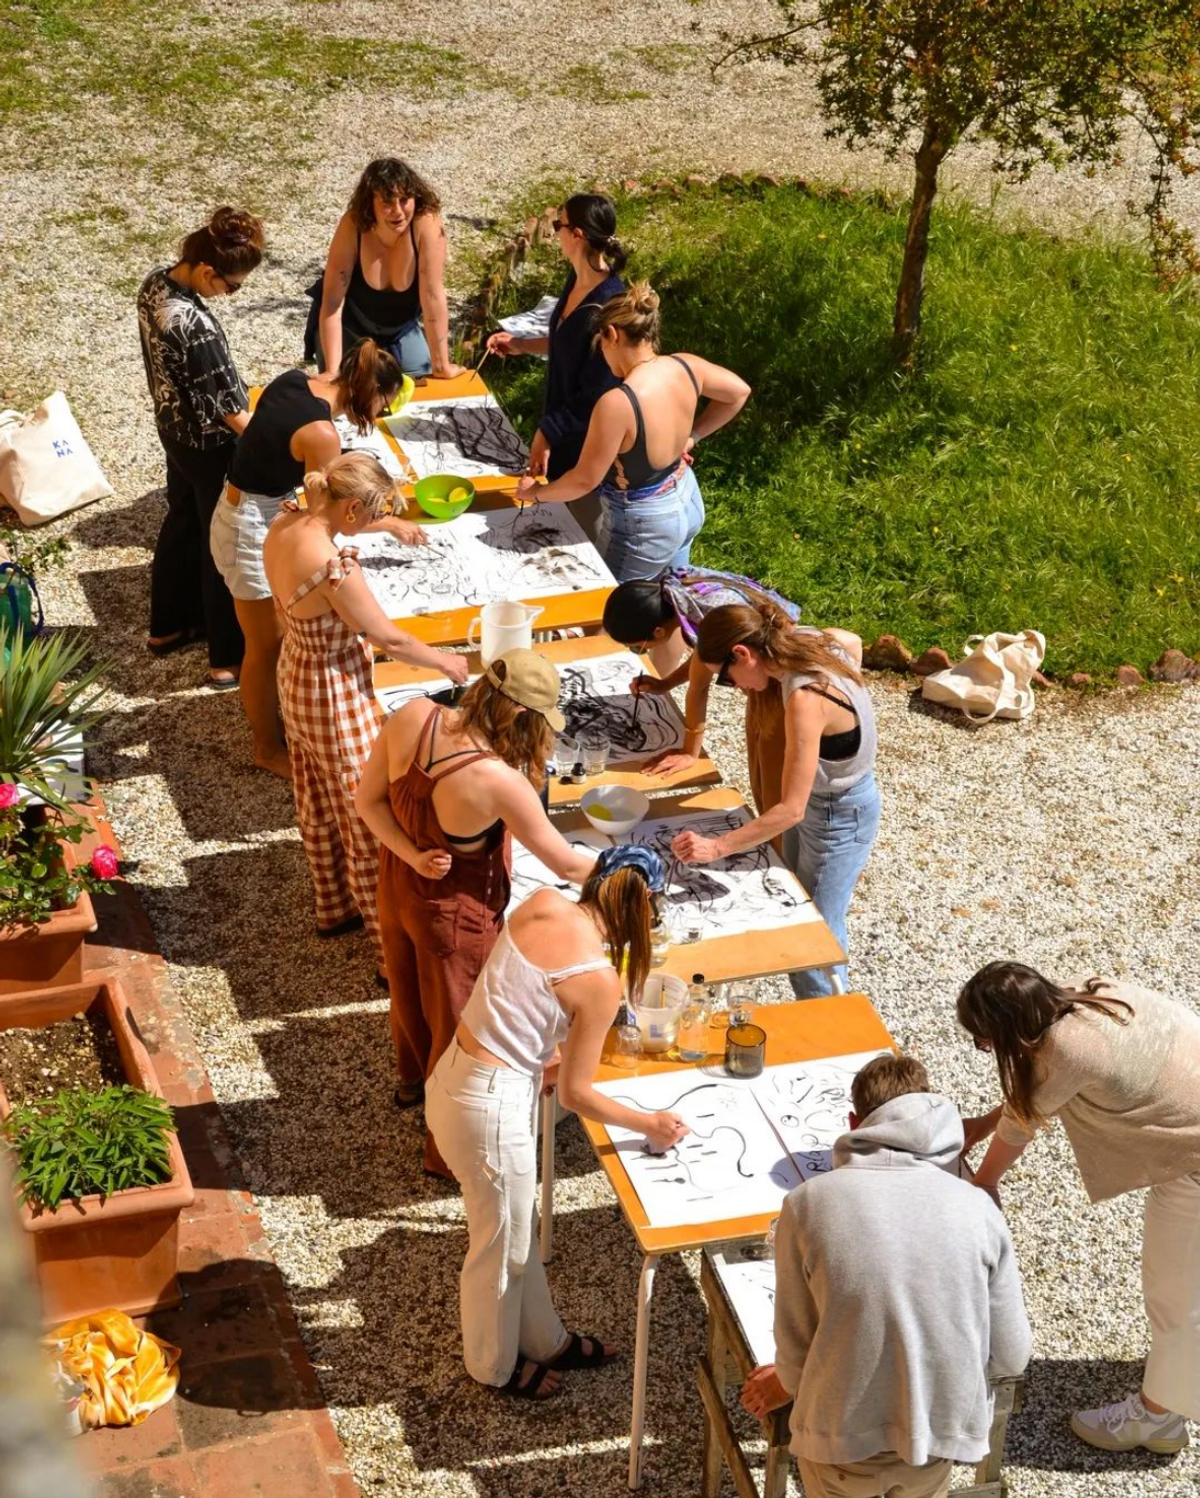 Villa Lena in Tuscany welcomes up to 40 residents (including musicians, writers, visual artists, dancers and filmmakers) a year for between two weeks and two months Courtesy of Villa Lena